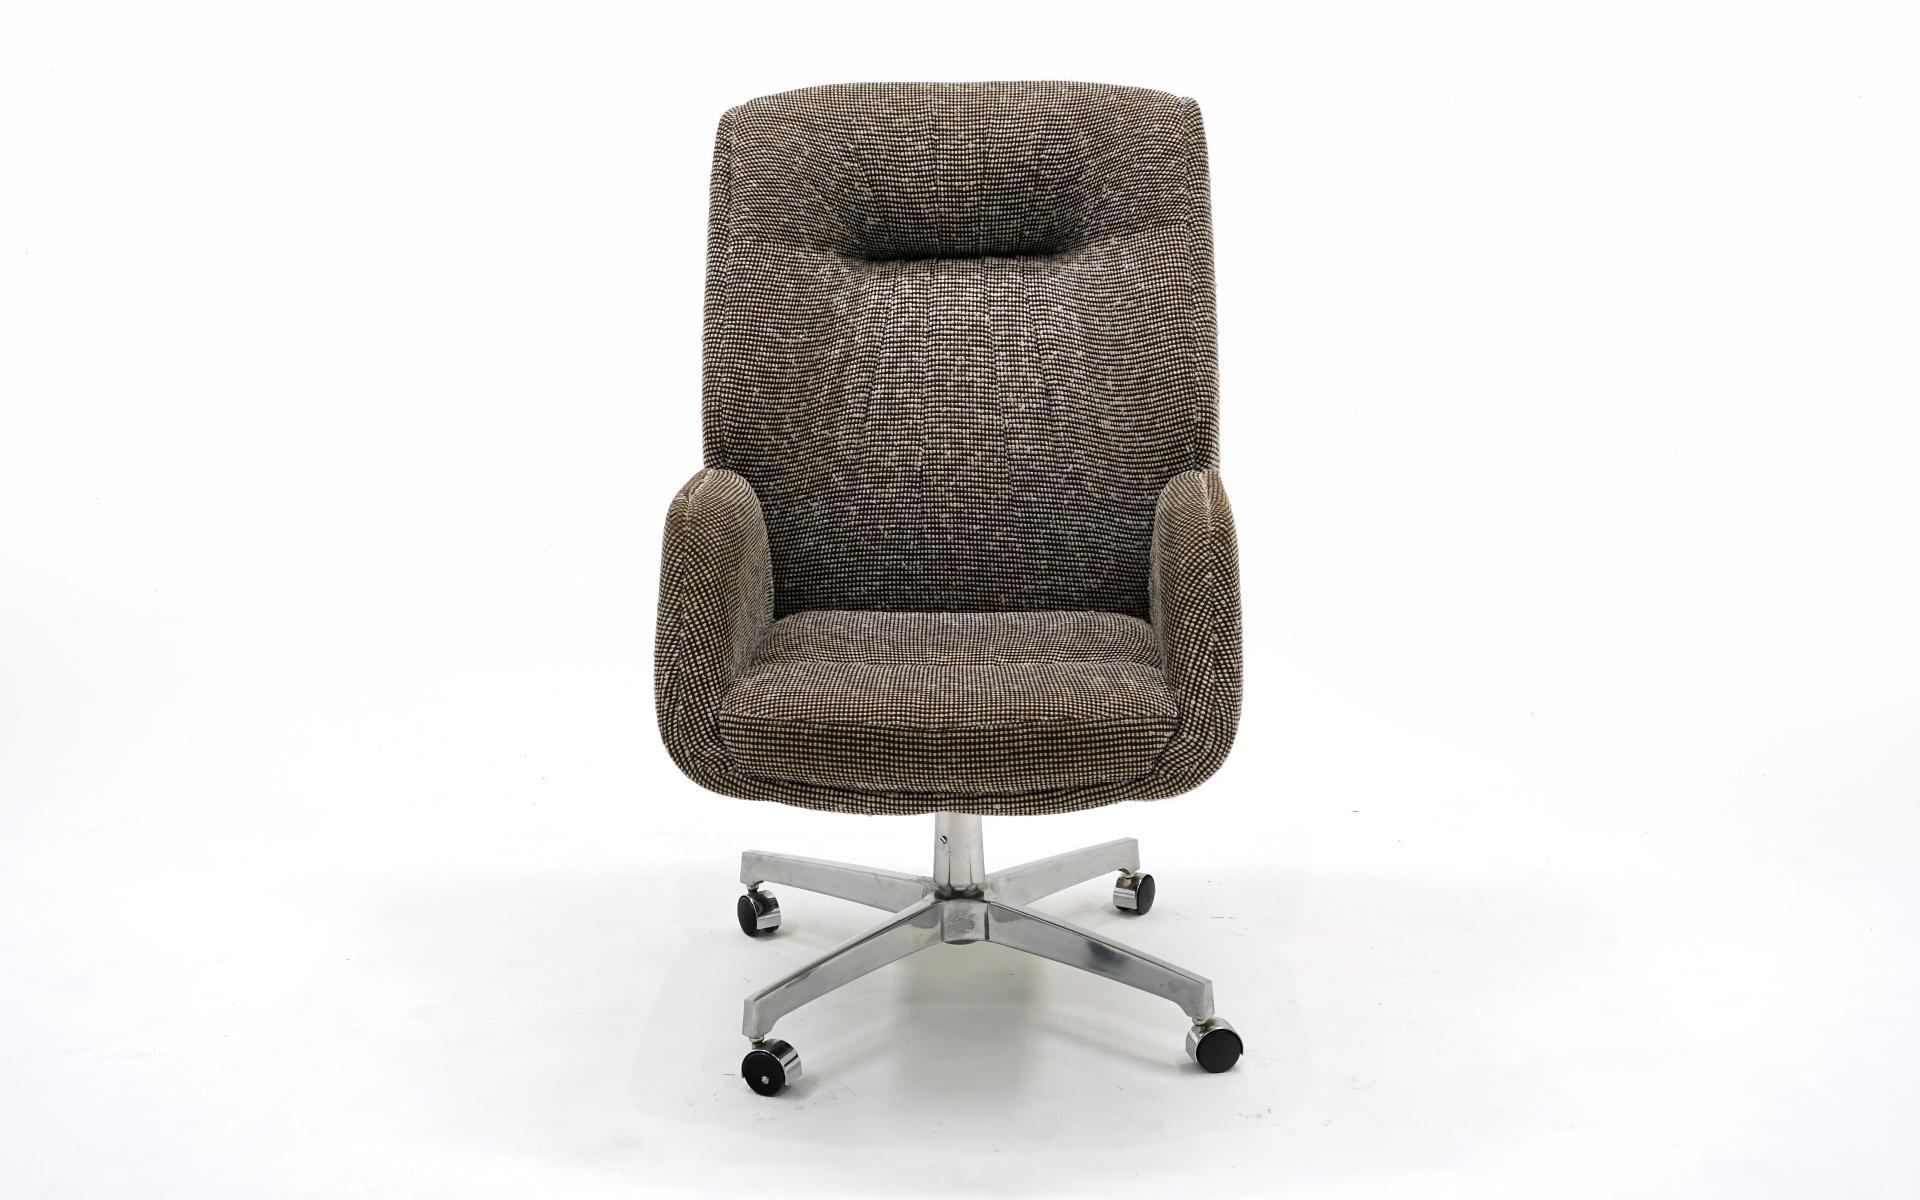 HIgh back executive desk chair made by Thonet, 1960s.  Tilt, 360 degree swivel and very comfortable.  Retains the original tweed upholstery in very good condition.  Signed.  Ready to use.